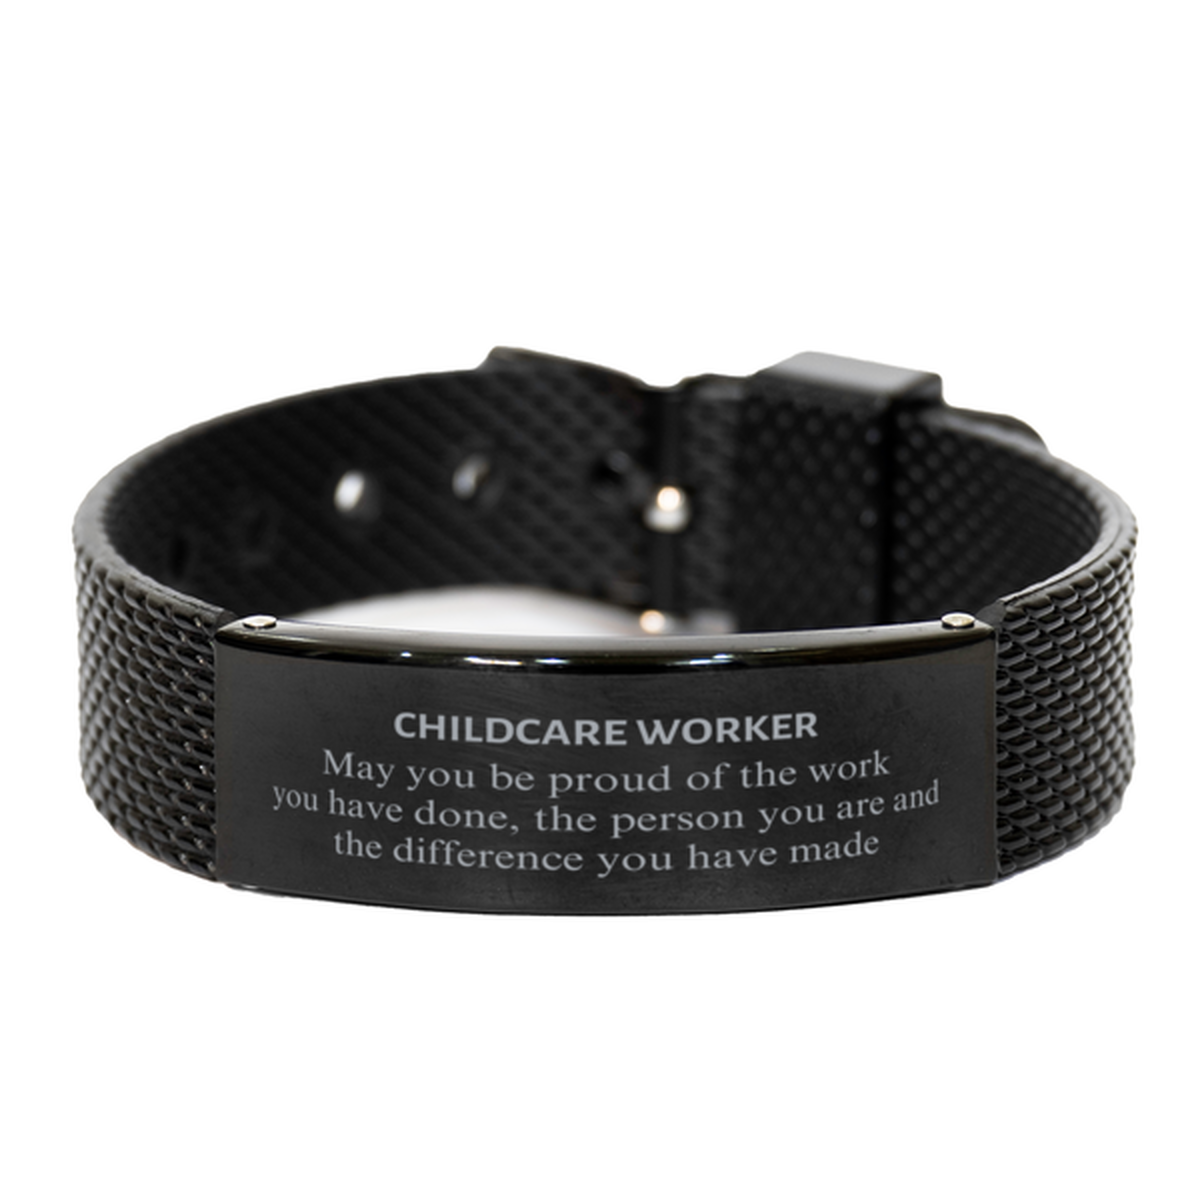 Childcare Worker May you be proud of the work you have done, Retirement Childcare Worker Black Shark Mesh Bracelet for Colleague Appreciation Gifts Amazing for Childcare Worker